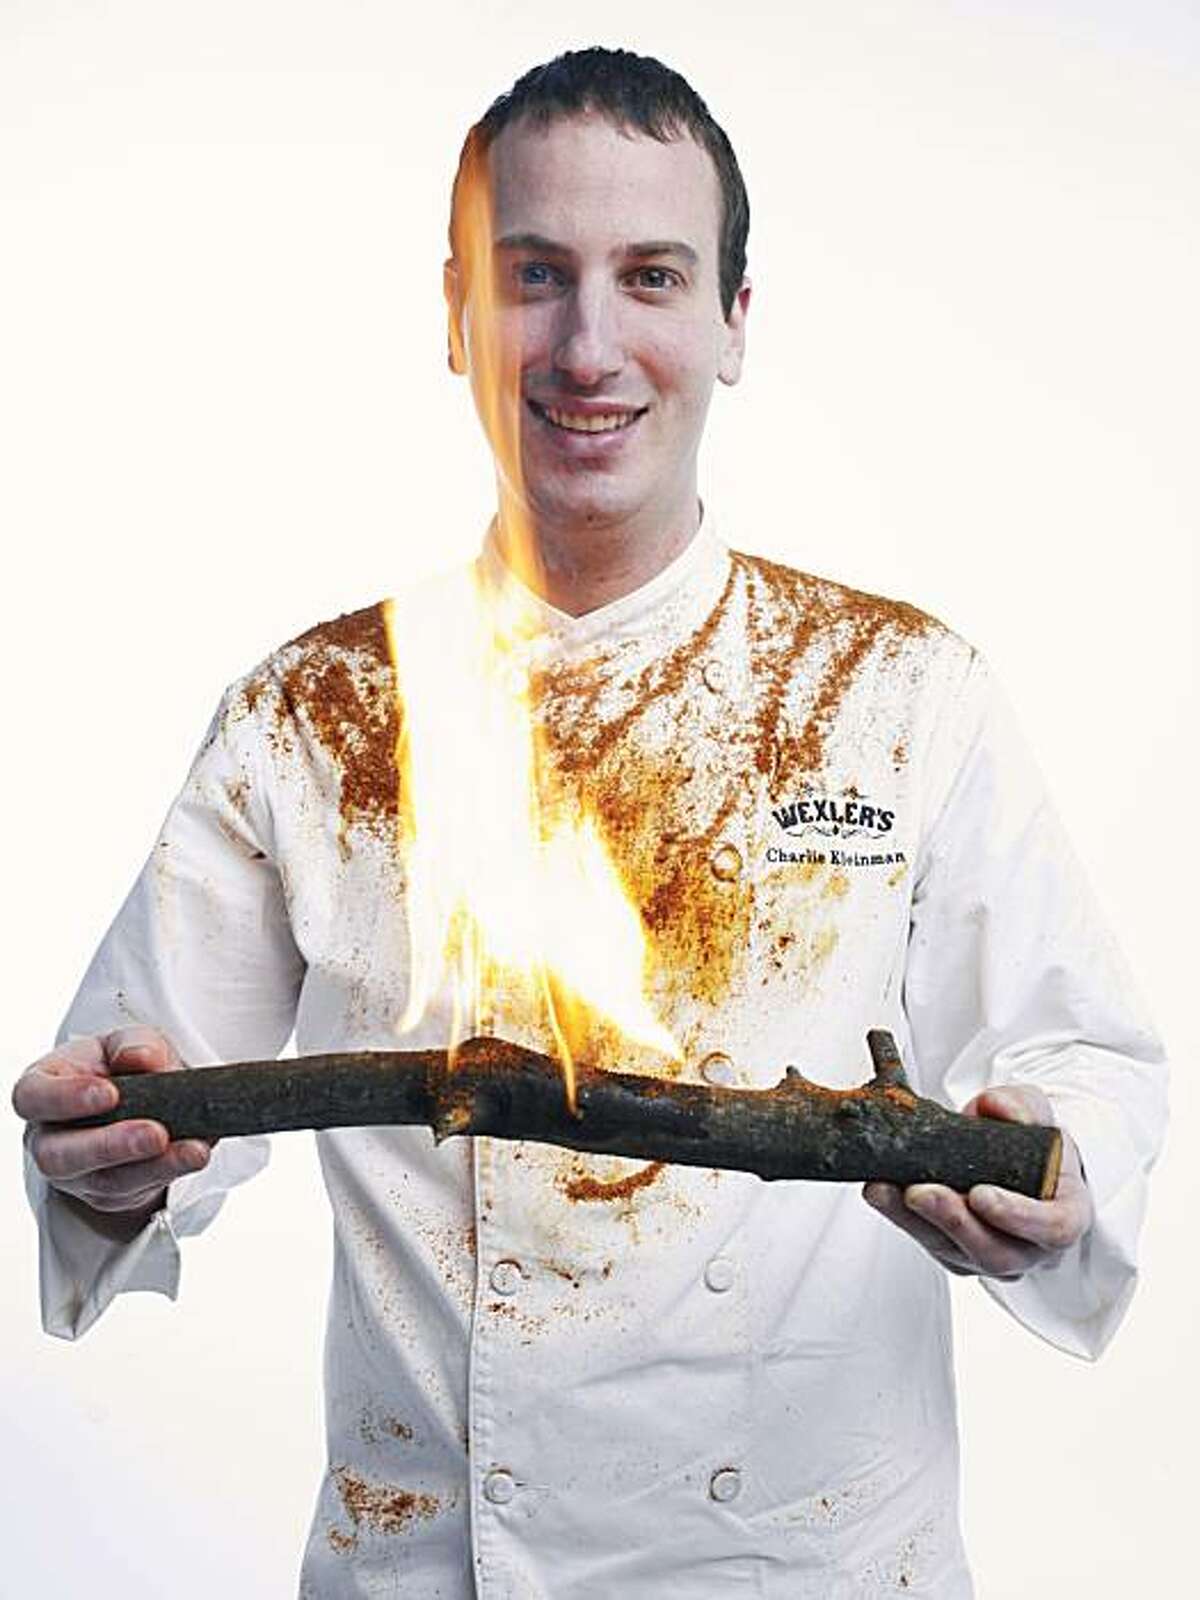 RISINGSTARS_KLEINMAN05_JOHNLEEPICTURES.JPG Charlie Kleinman, chef at Wexler's in San Francisco. Photo taken in the Chronicle photo studio. By JOHN LEE/SPECIAL TO THE CHRONICLE